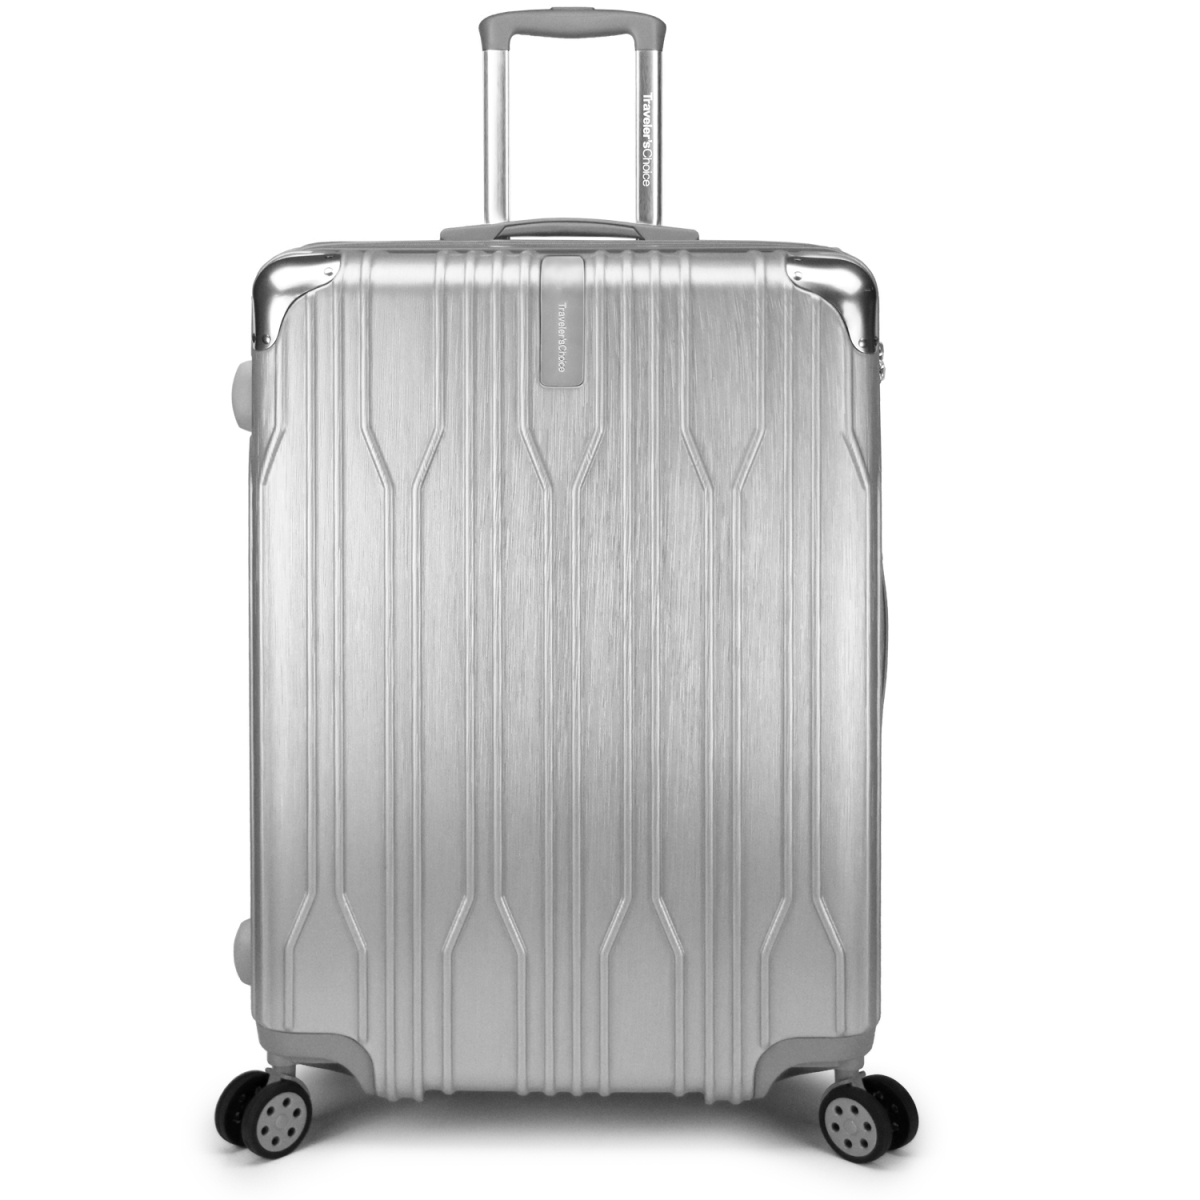 Travelers Choice Tc09035g28 Bell Weather Expandable 28 In. Spinner Luggage, Silver